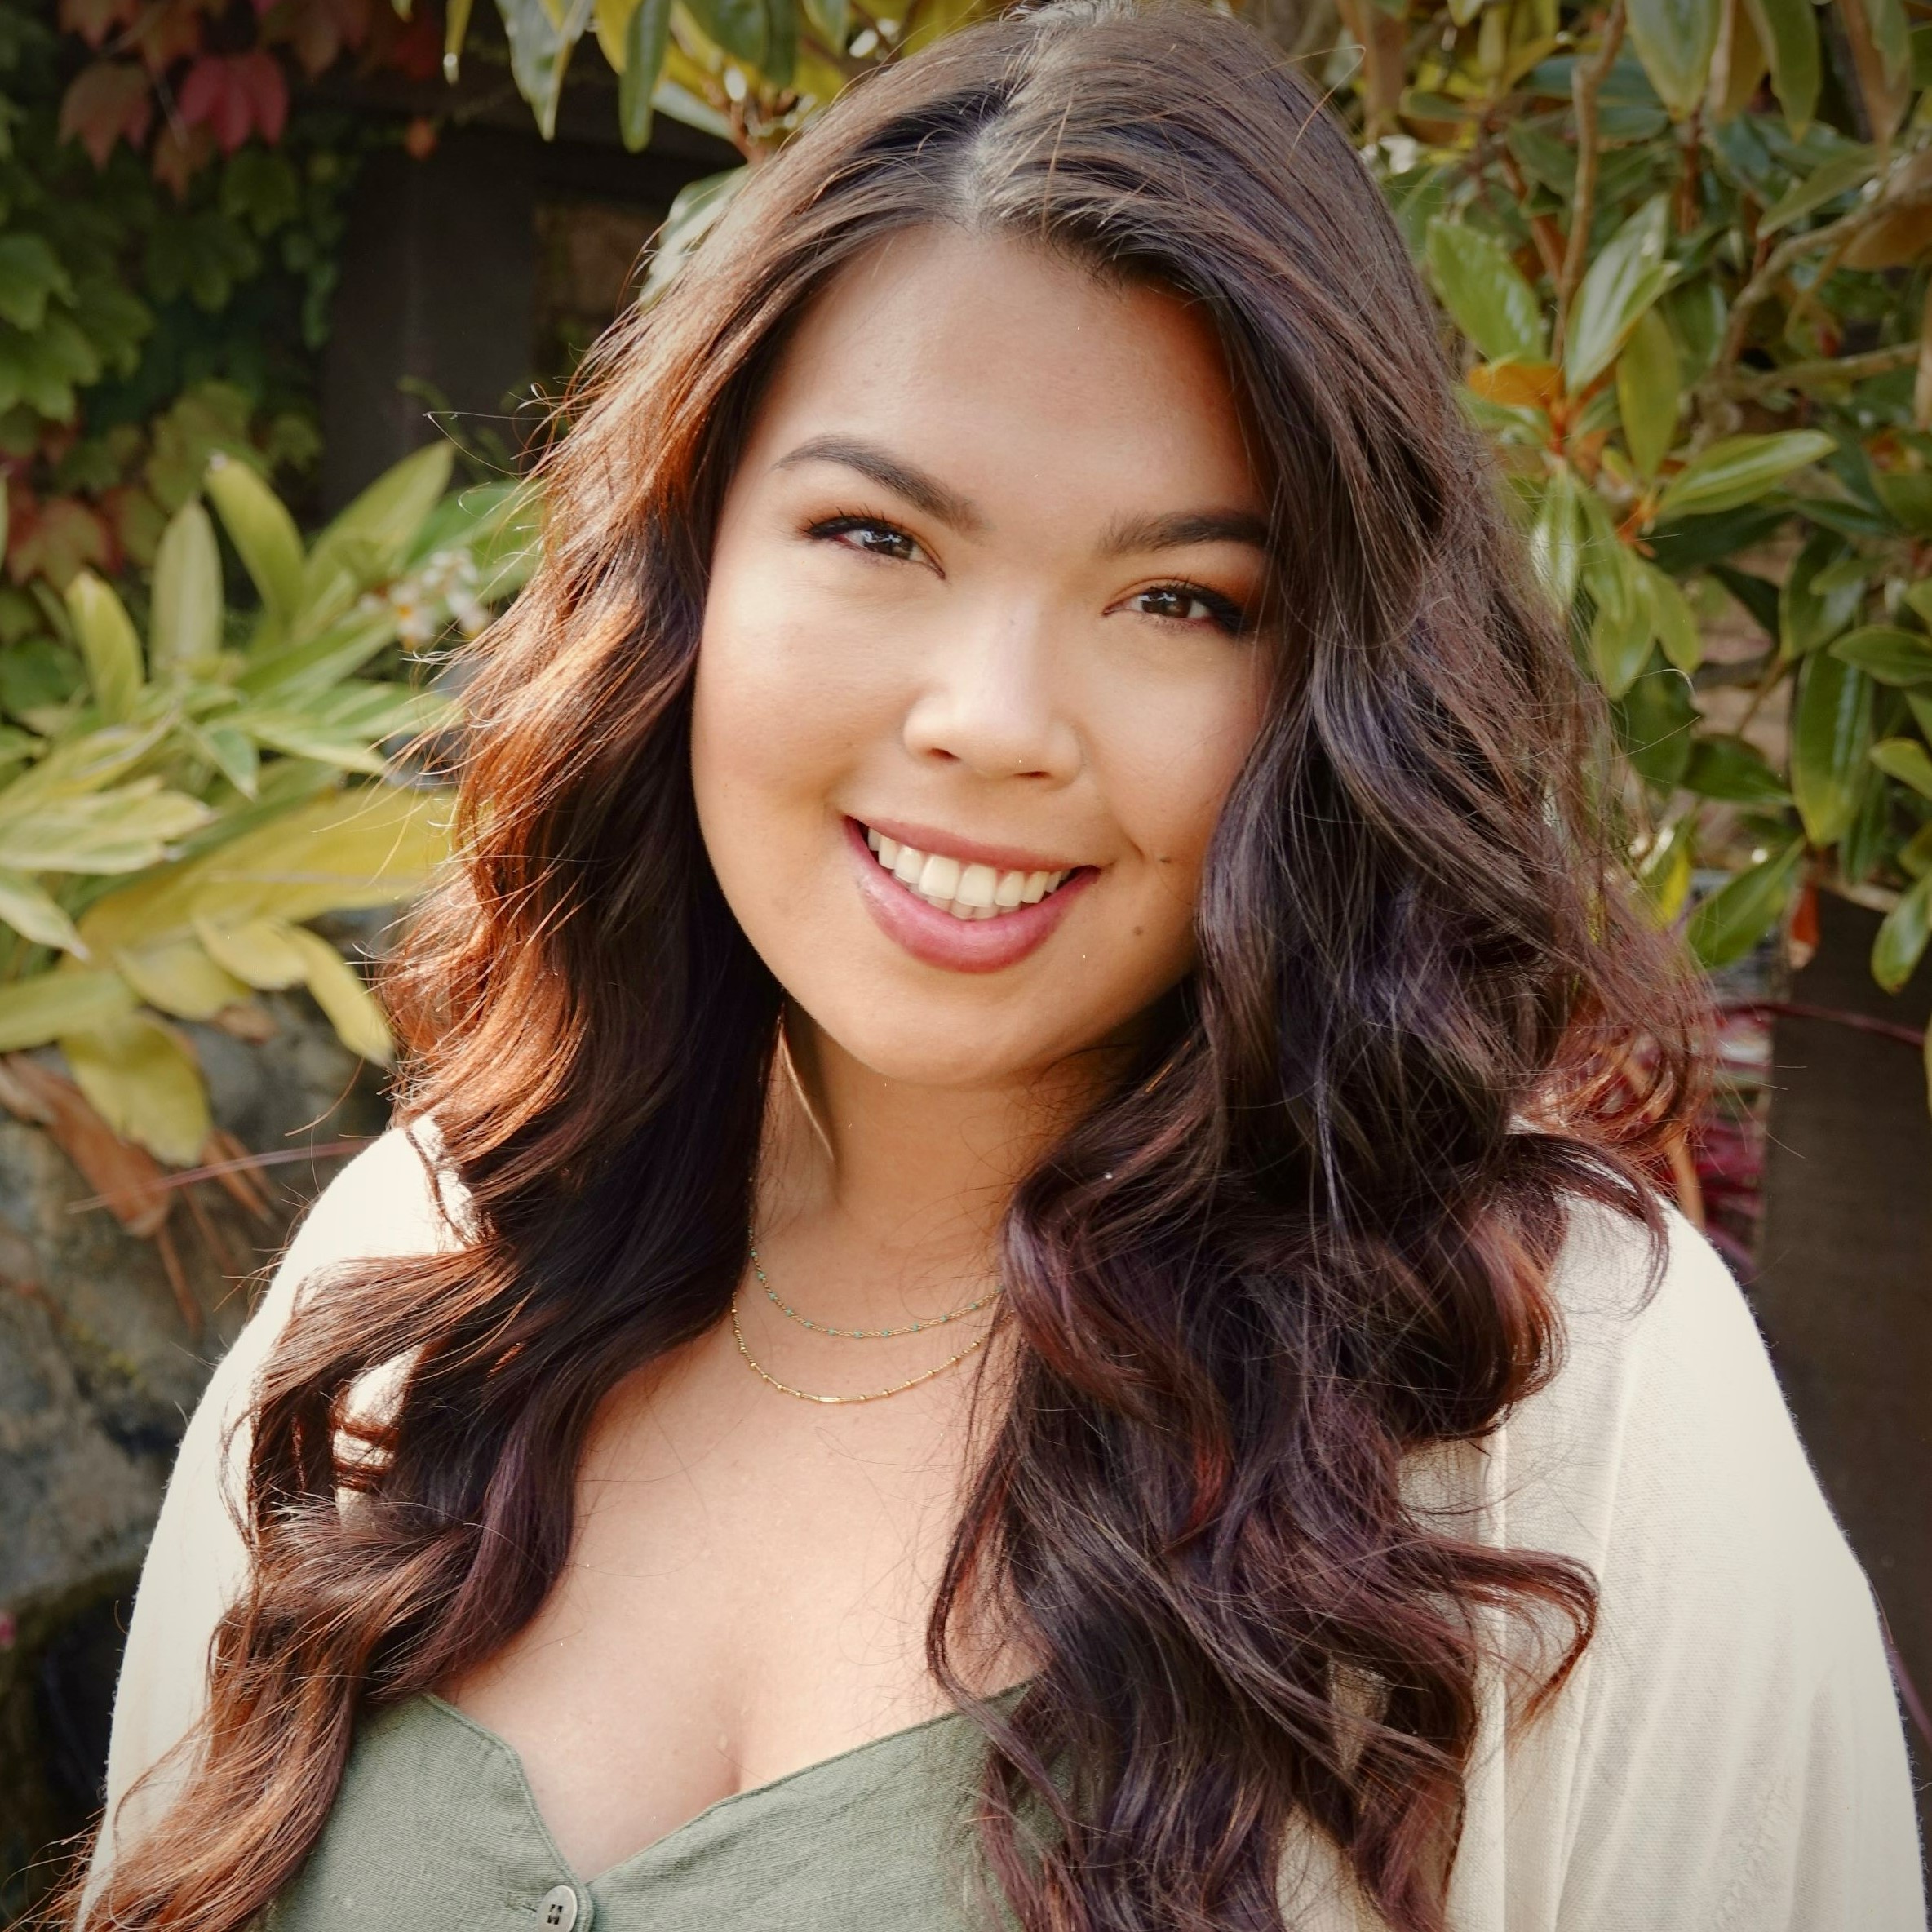 Headshot of Christina, a biracial Asian and White woman with curled long brown hair, an olive green top, and cream-colored cardigan smiling at the camera outdoors with a large plant in the background.